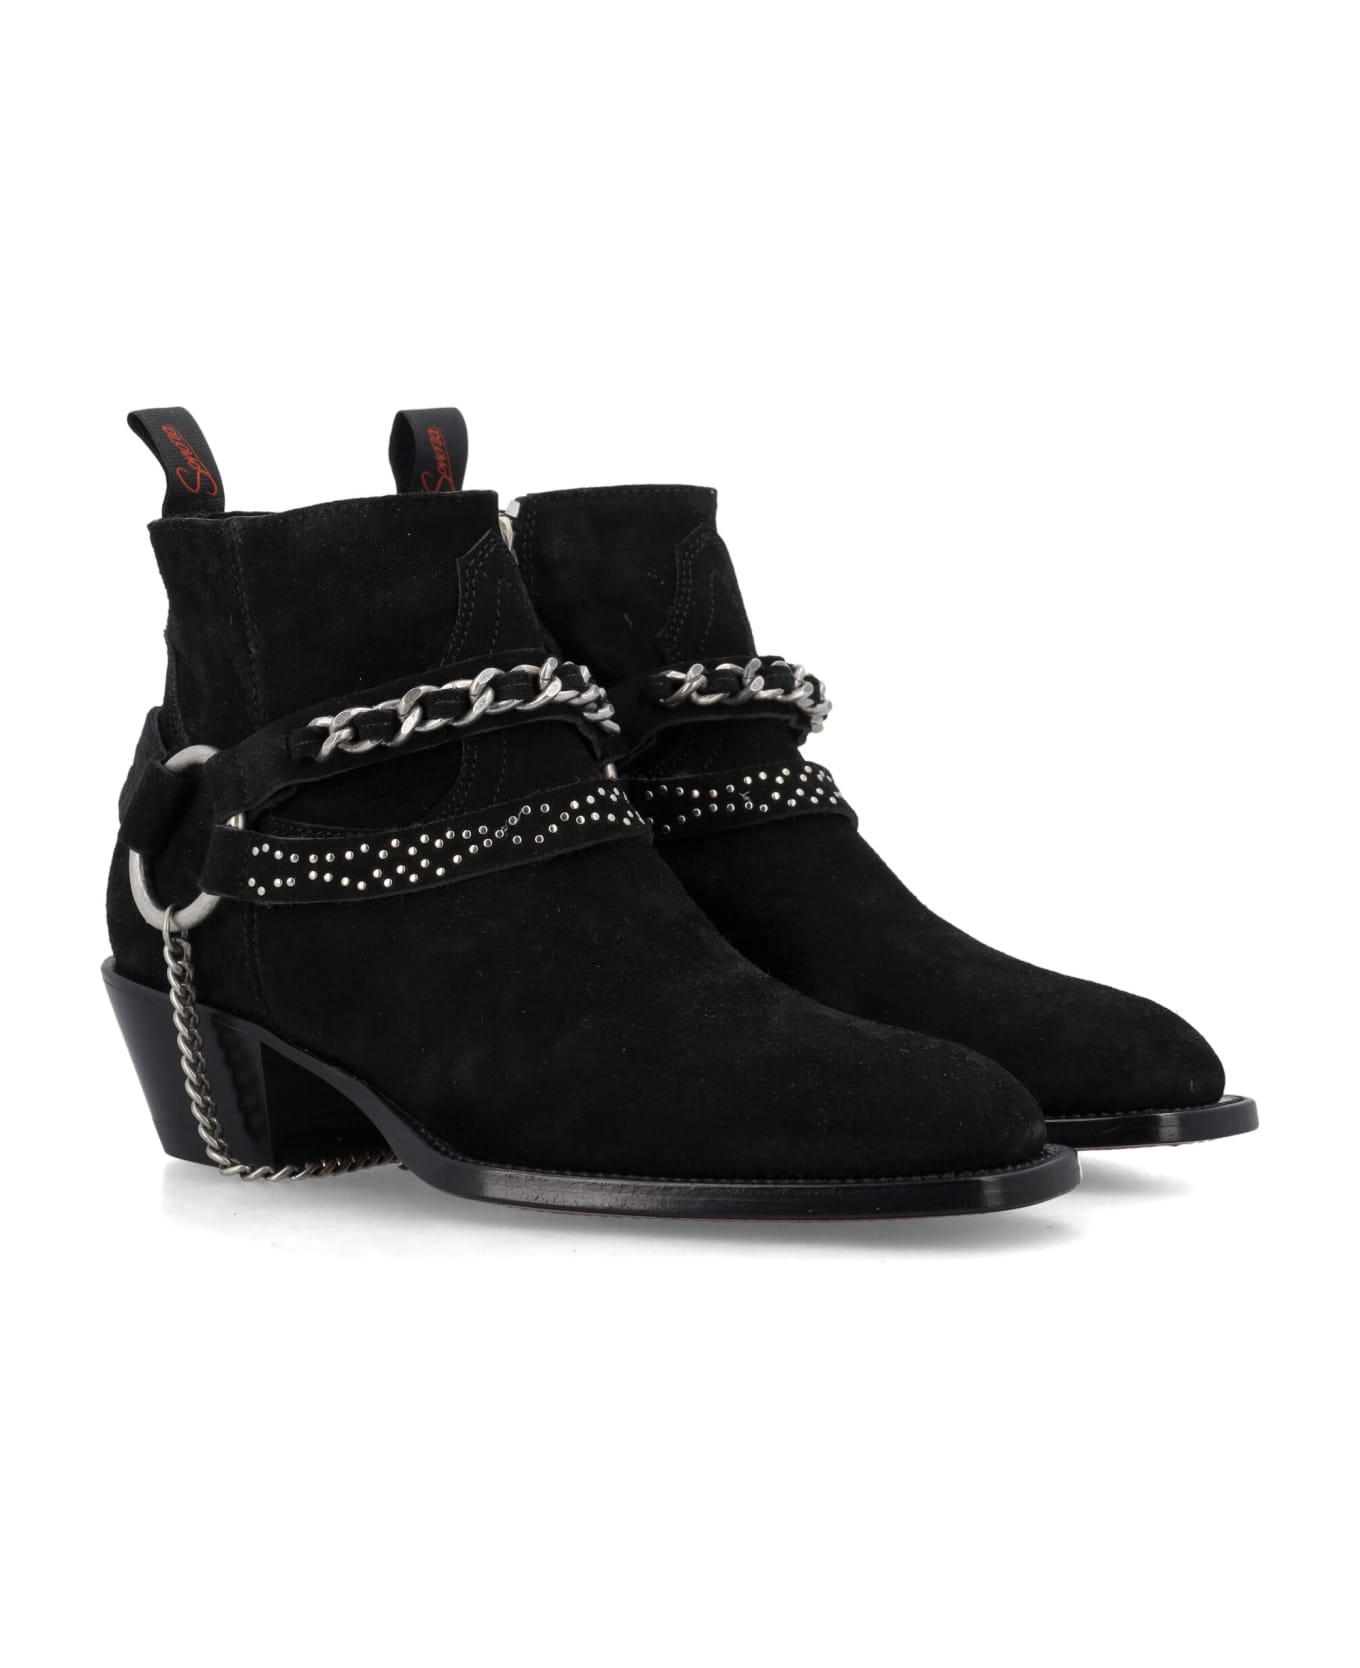 Sonora Dulce Belt Ankle Boots - BLACK ブーツ